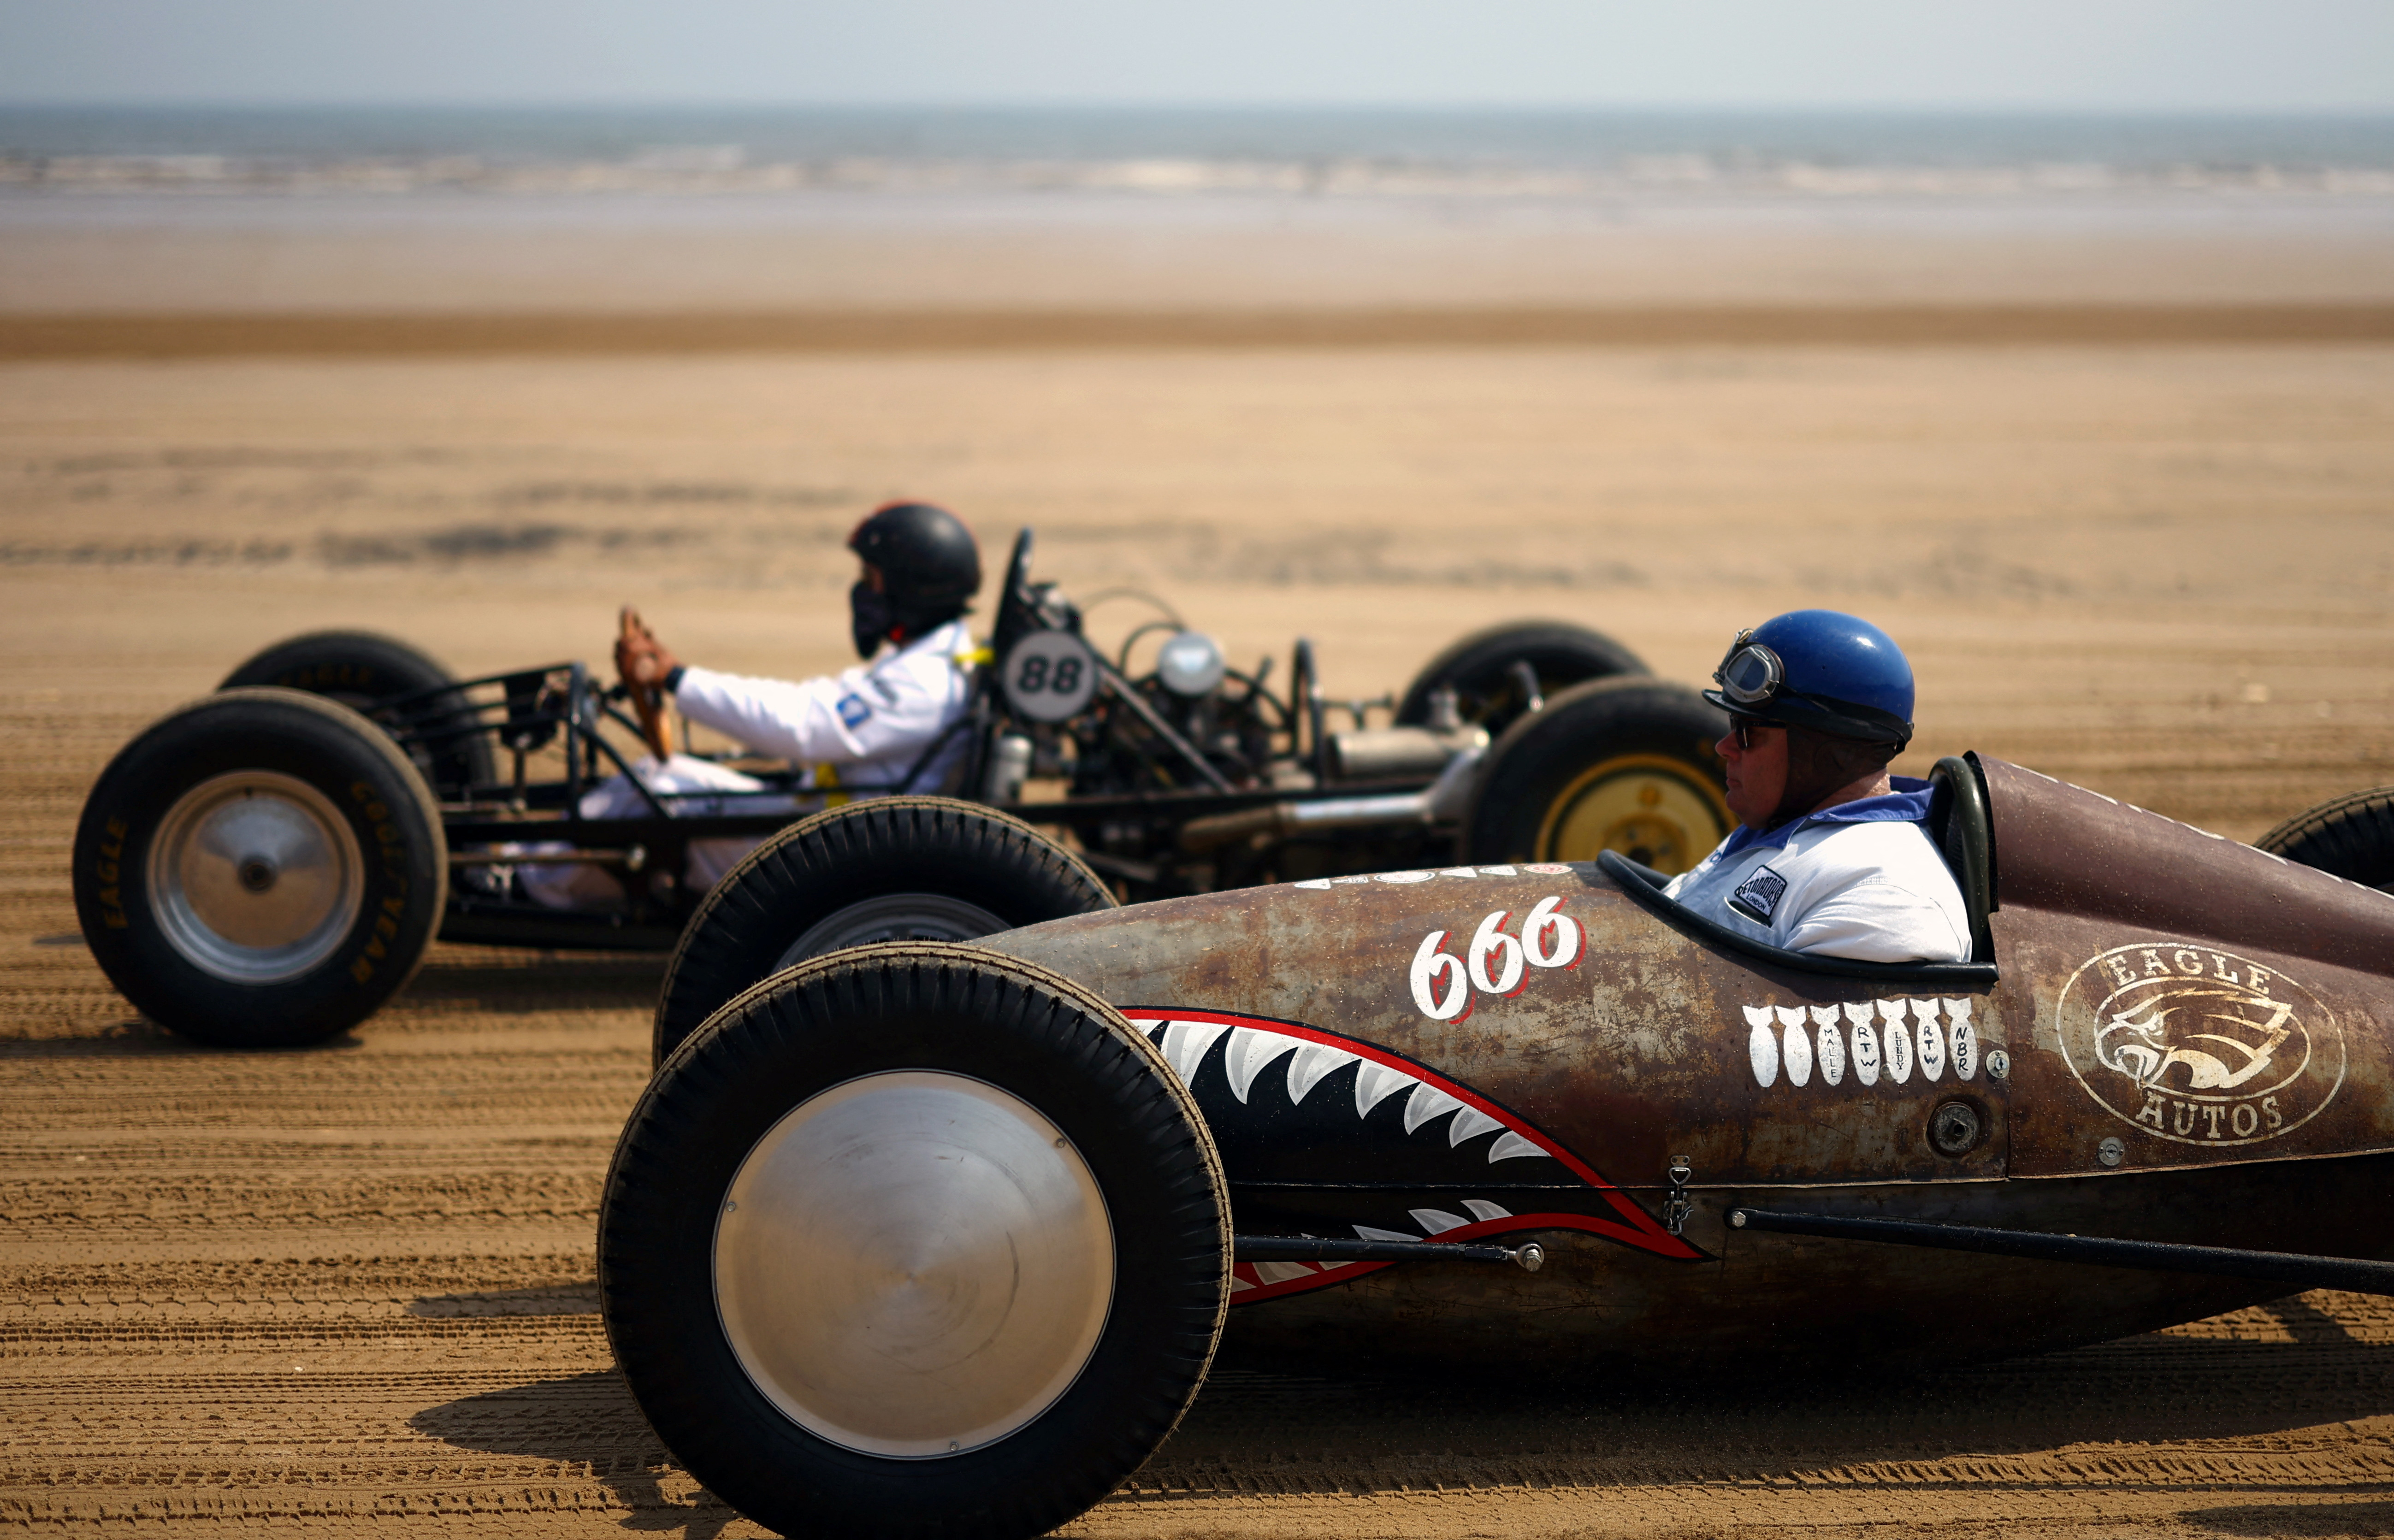 Motoring enthusiasts take part in the 'Race The Waves' classic car and motorcycle meet at the beach in Bridlington